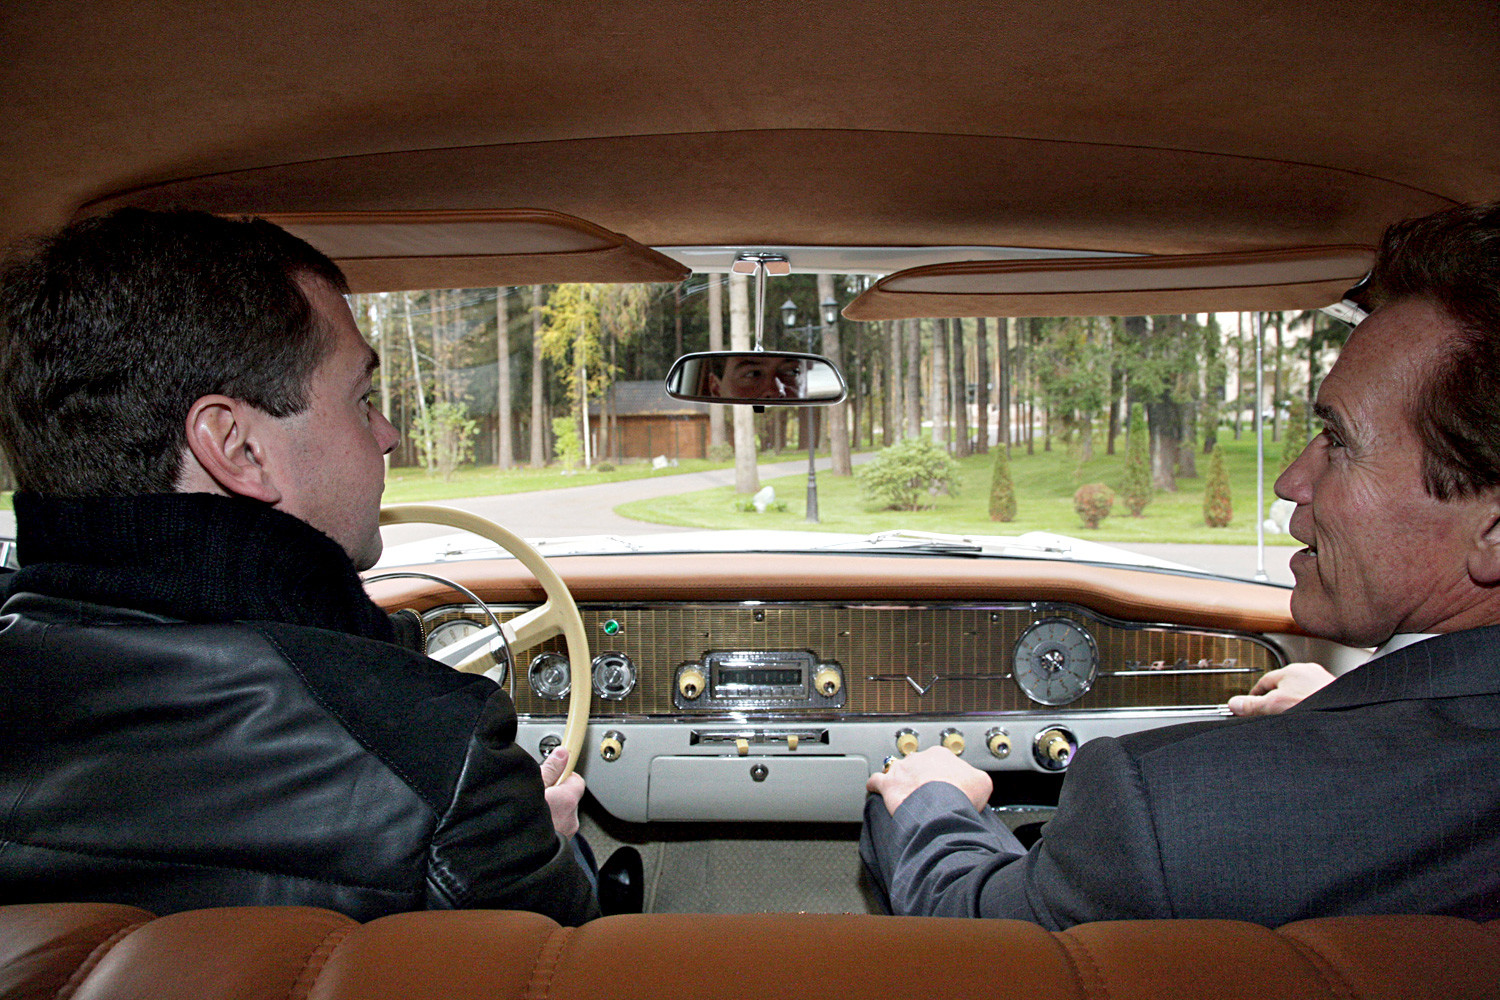 “Mister President, you are a very good driver,” twitted Schwarzenegger later